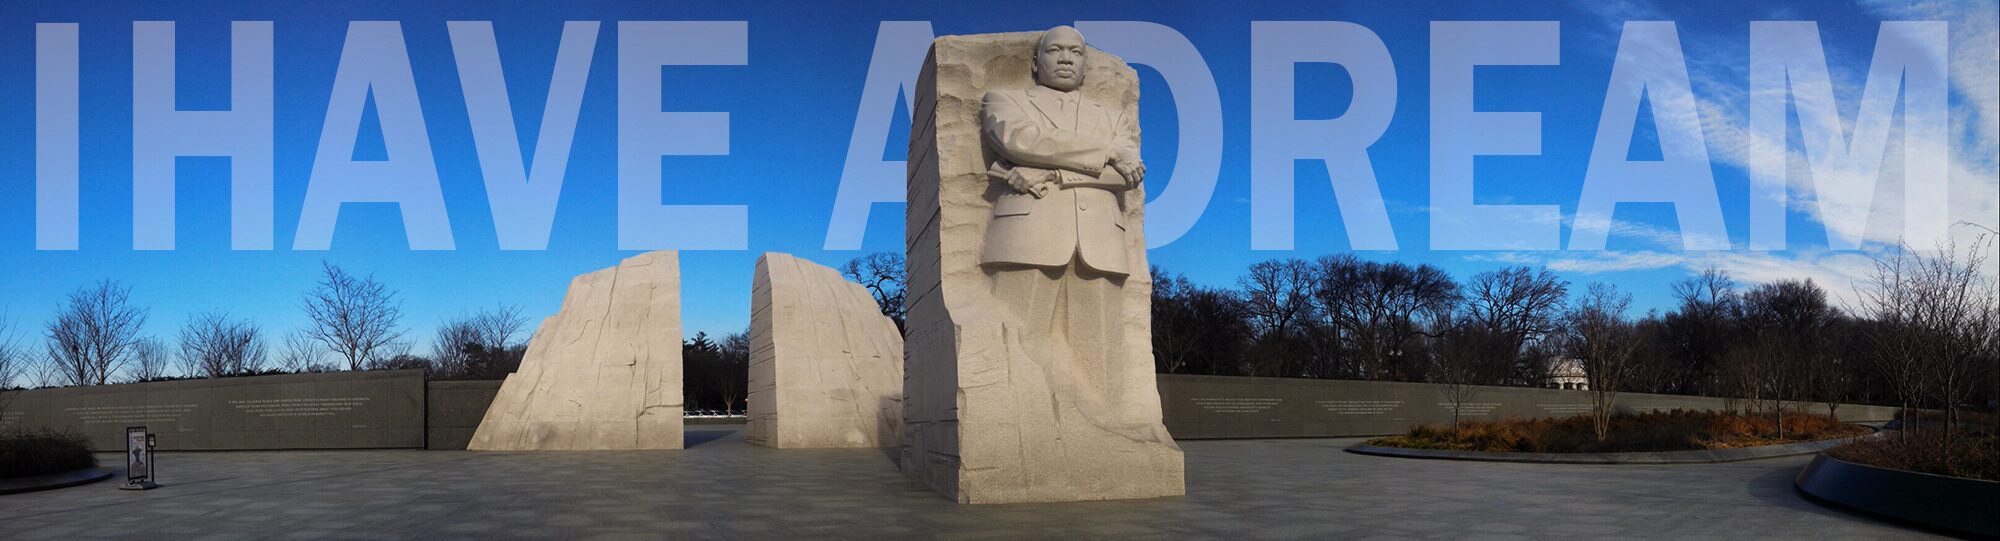 In 1986, the United States made MLK day a federal holiday to commemorate the life and work of the civil rights activist Dr. Martin Luther King Jr., who was a key figure in the American Civil Rights Movement. Today, MLK day is not only a federal holiday but has been adopted by all 50 states. (U.S. Air Force photo)